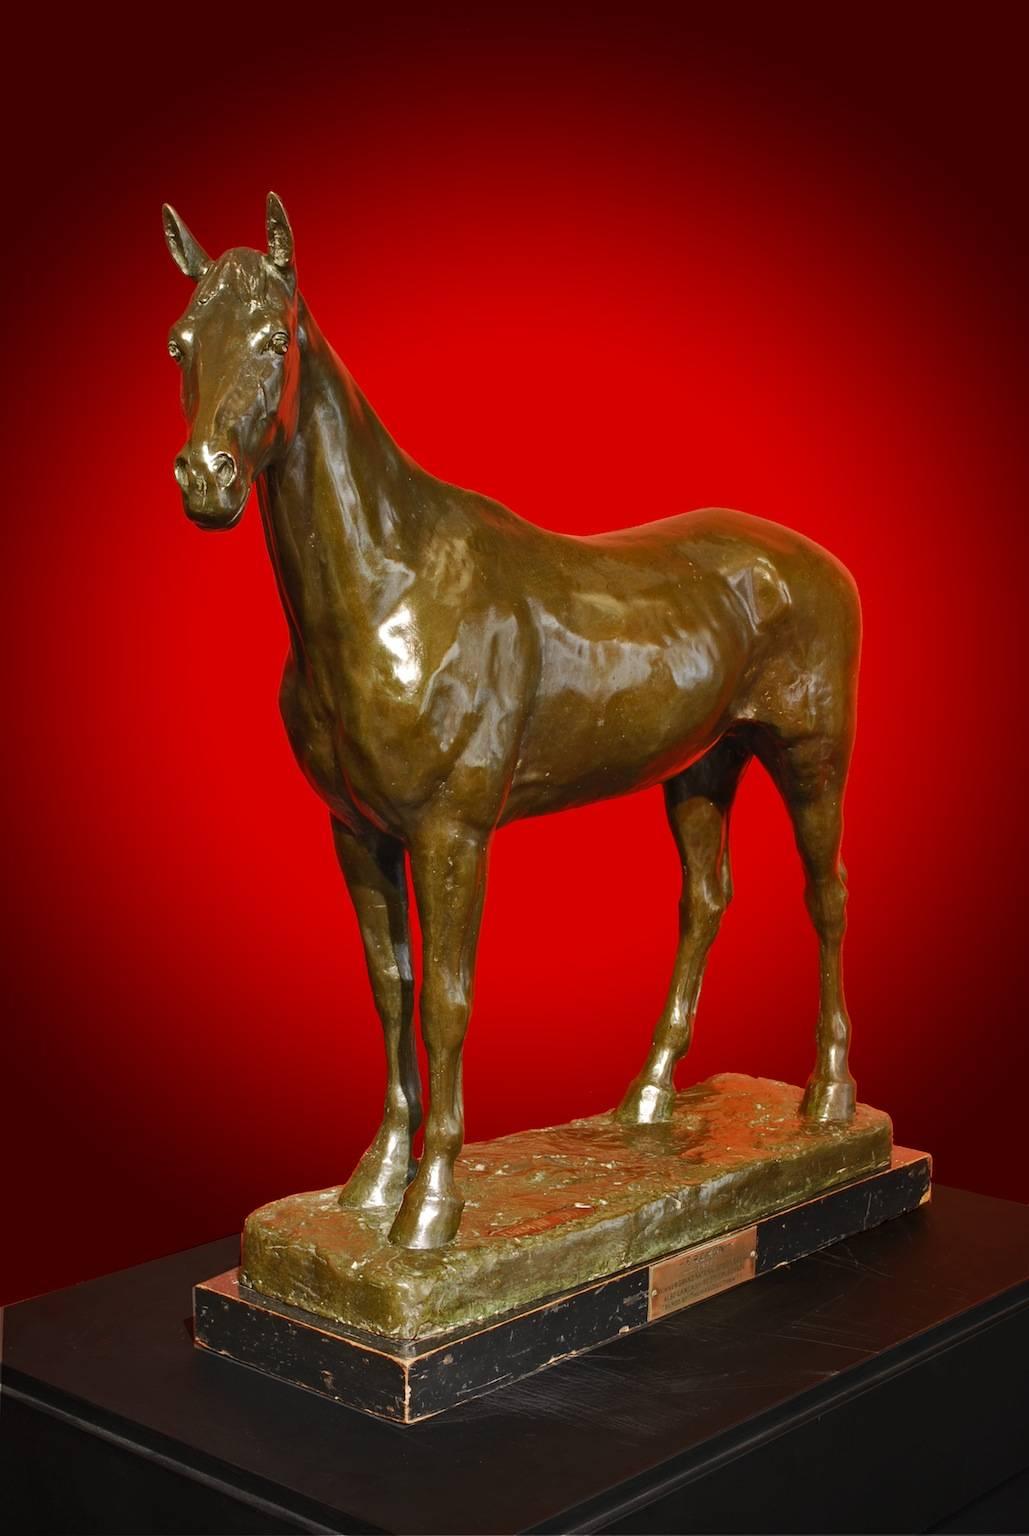 
It was likely made to commemorate Eremon's 1907 Grand National win and given by the owner Stanley McKnight Howard to Major Townsend, a vet who had 'fired' the horses legs, transforming his race form. 

The 1907 victory is considered one of the